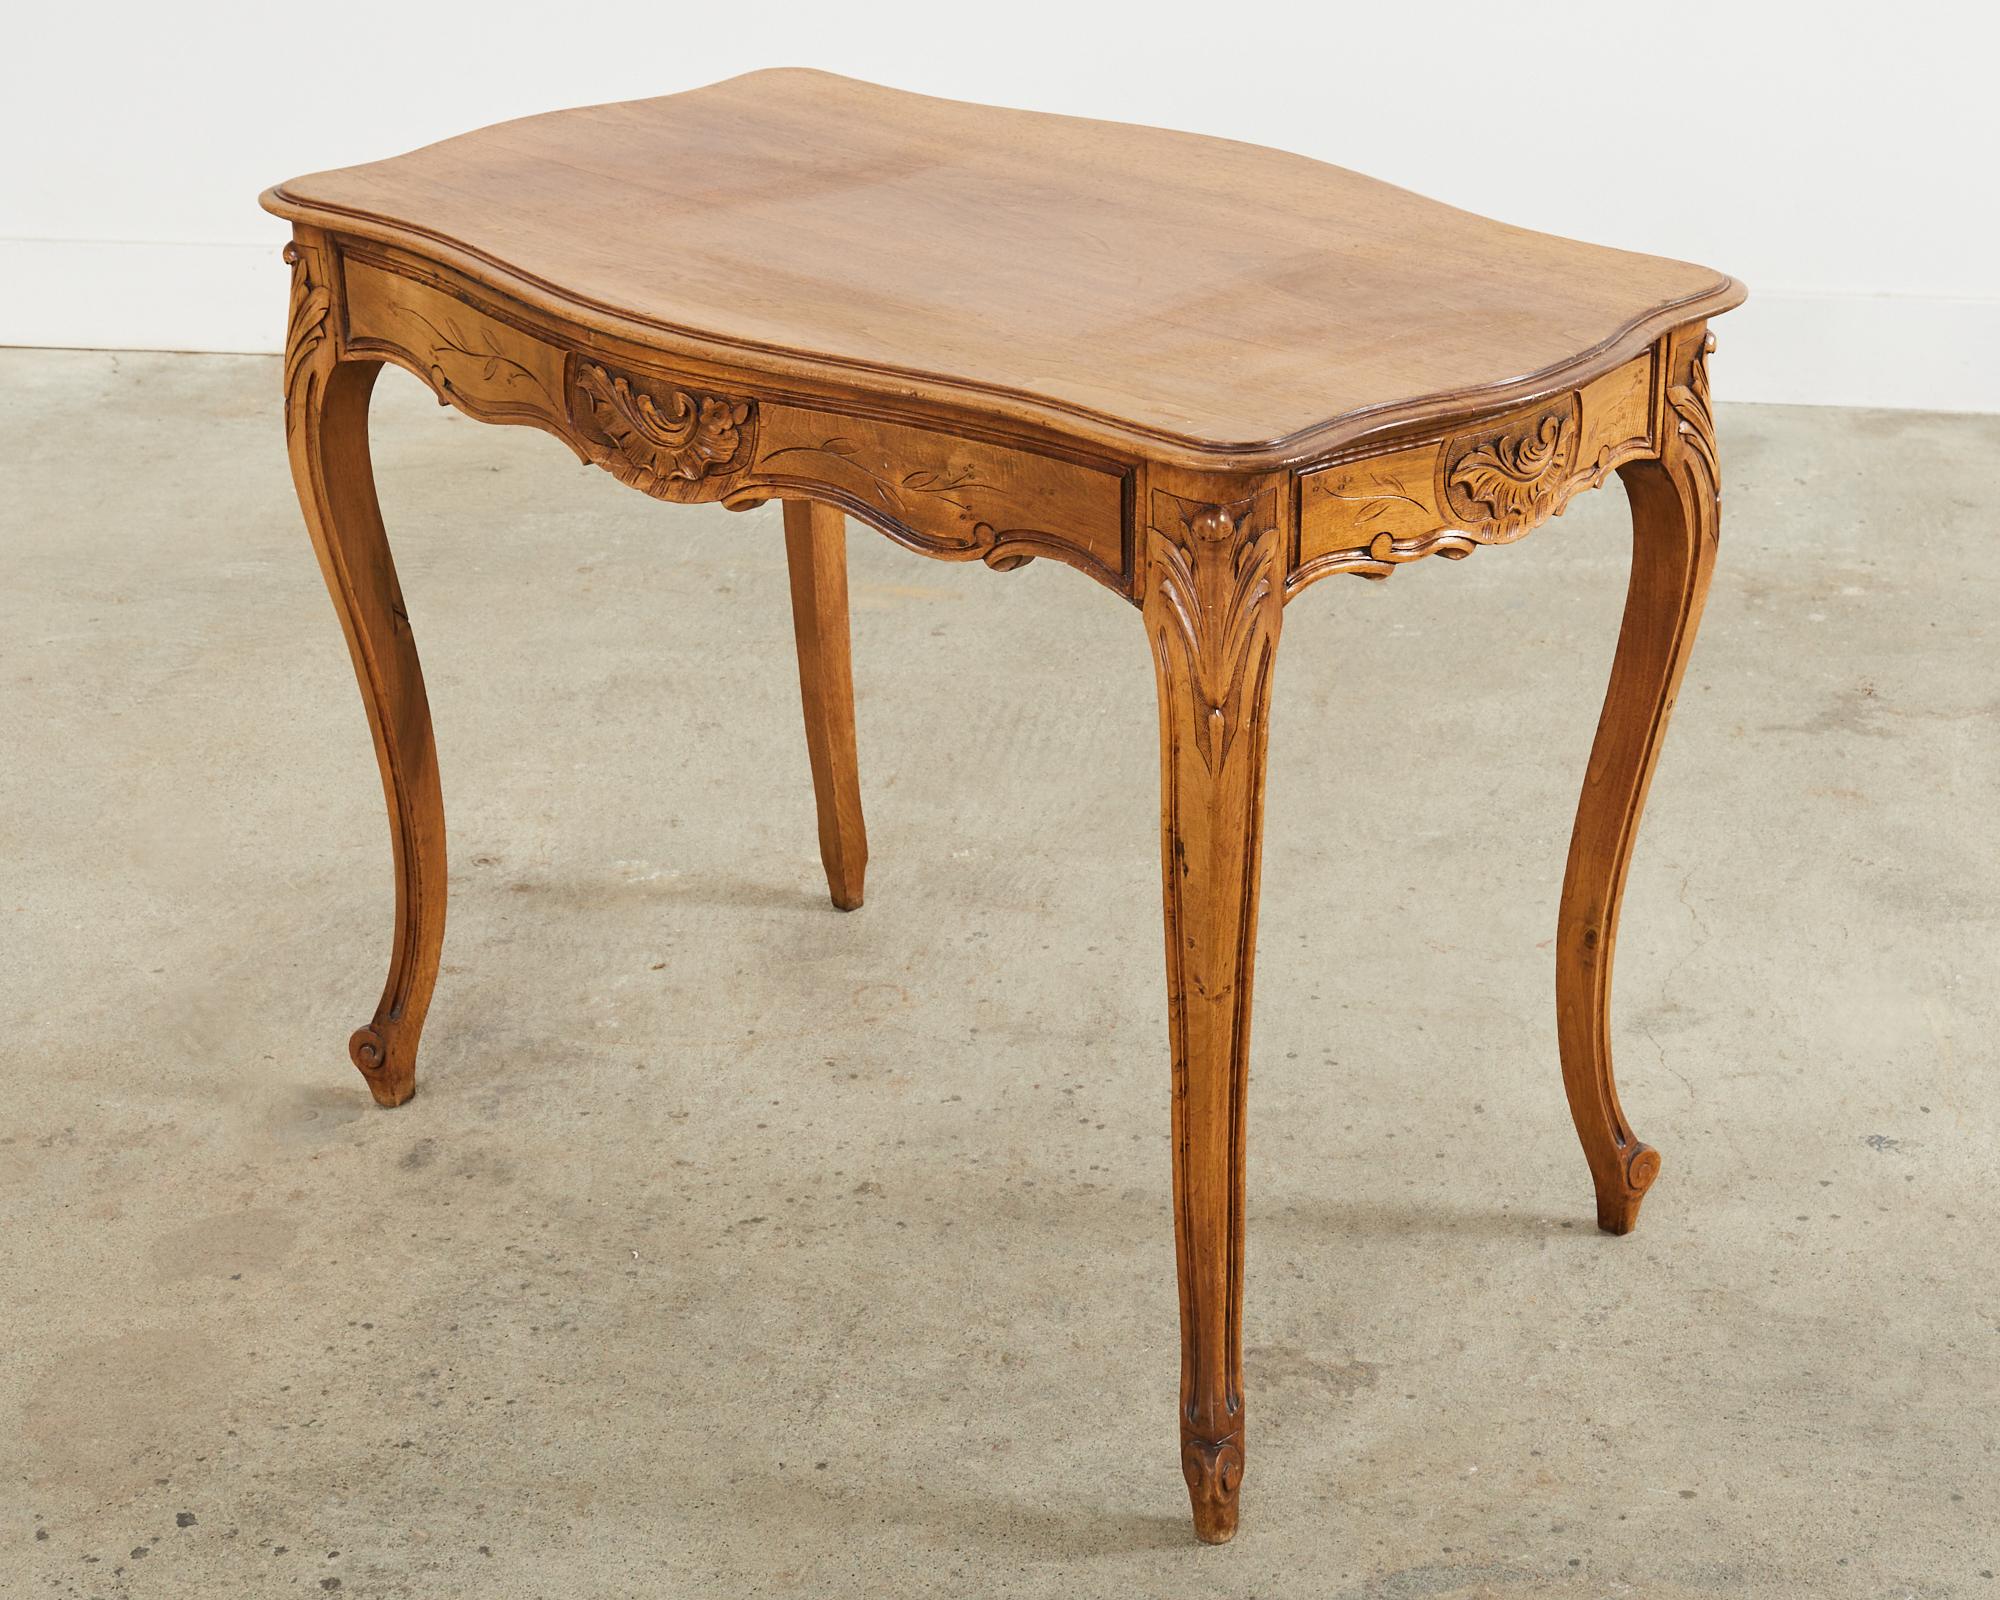 Hand-Crafted 19th Century Country French Provincial Walnut Writing Table Desk For Sale